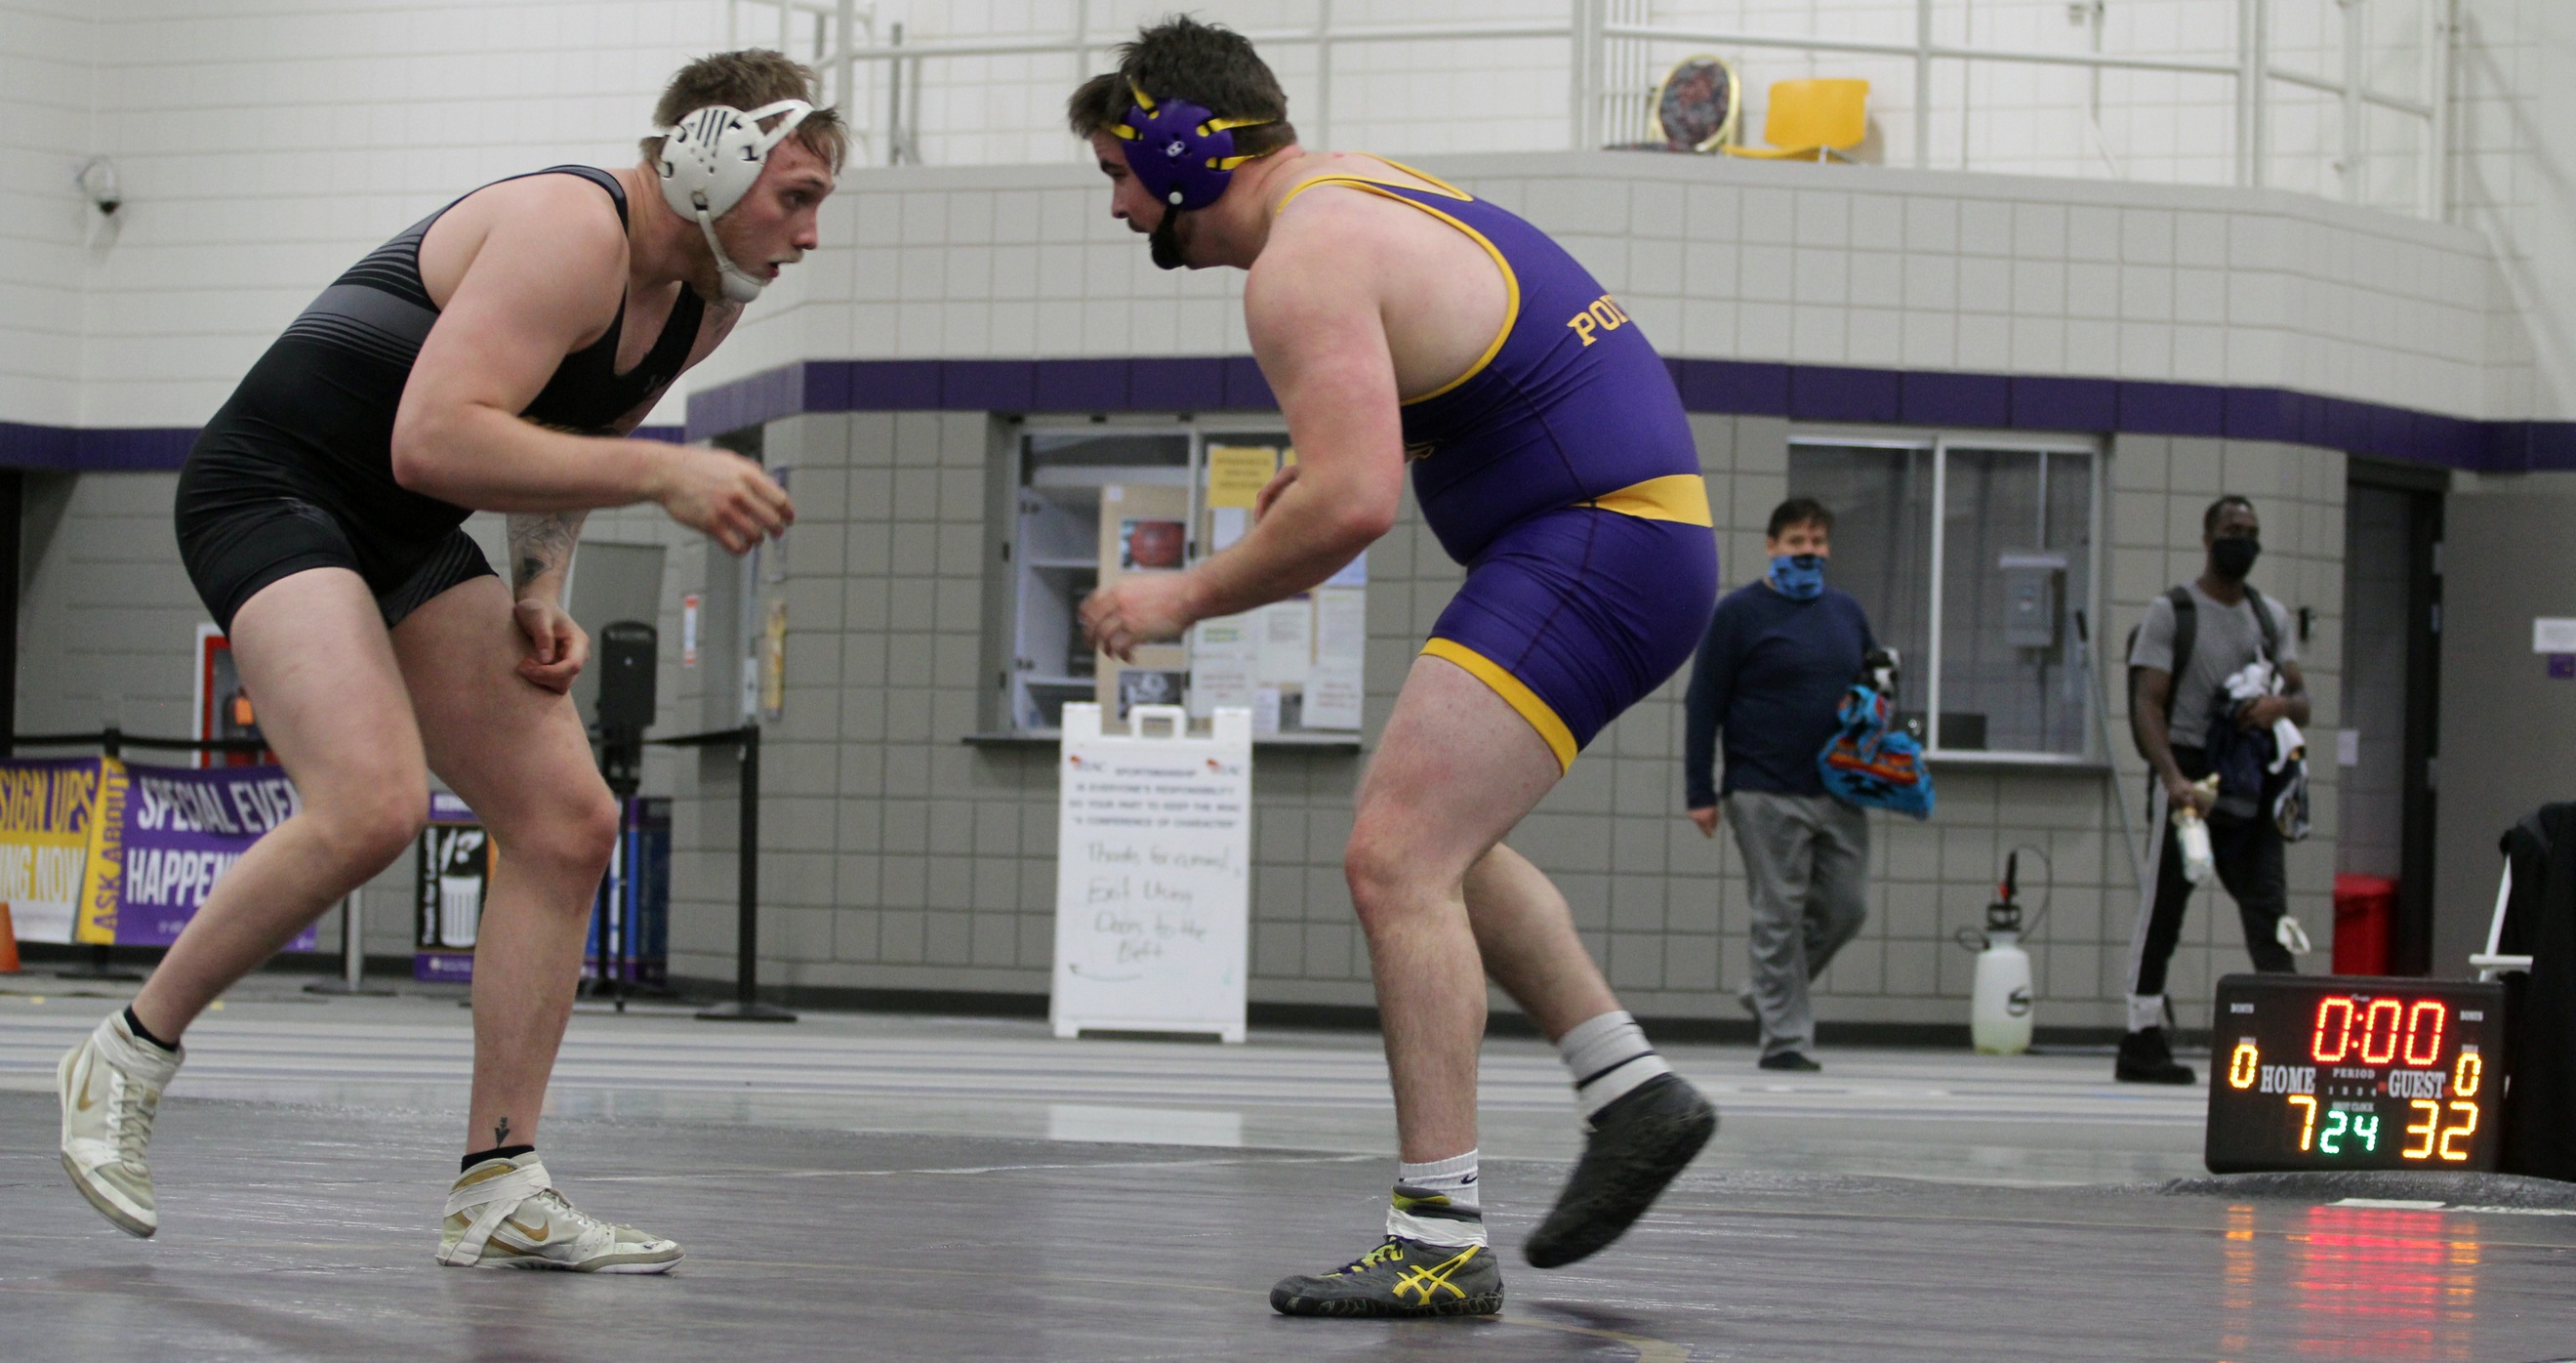 Jordan Lemcke closed UW-Oshkosh's largest victory over UW-Stevens Point in nearly four decades with his 8-0 win at 285 pounds.